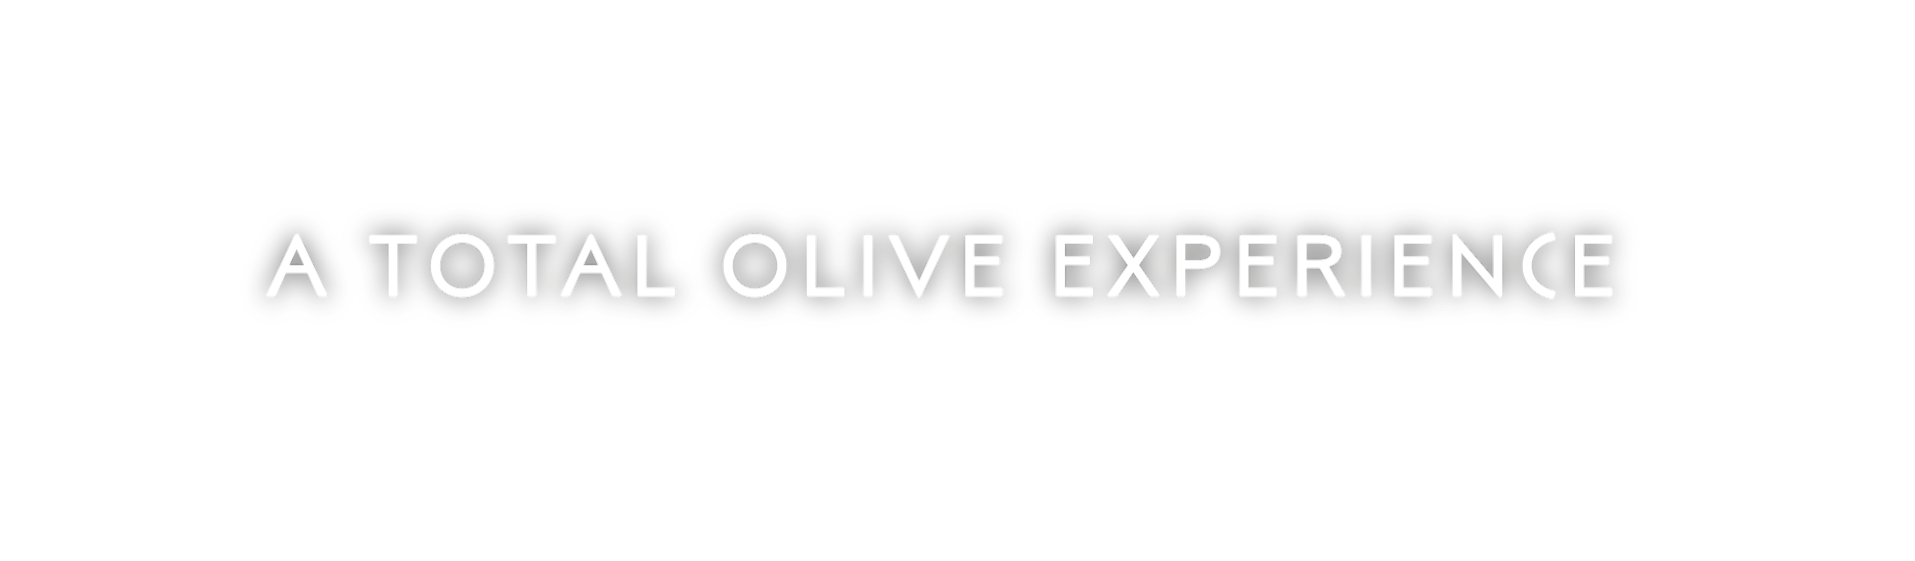 TOTAL OLIVE EXPERIENCE PHRASE